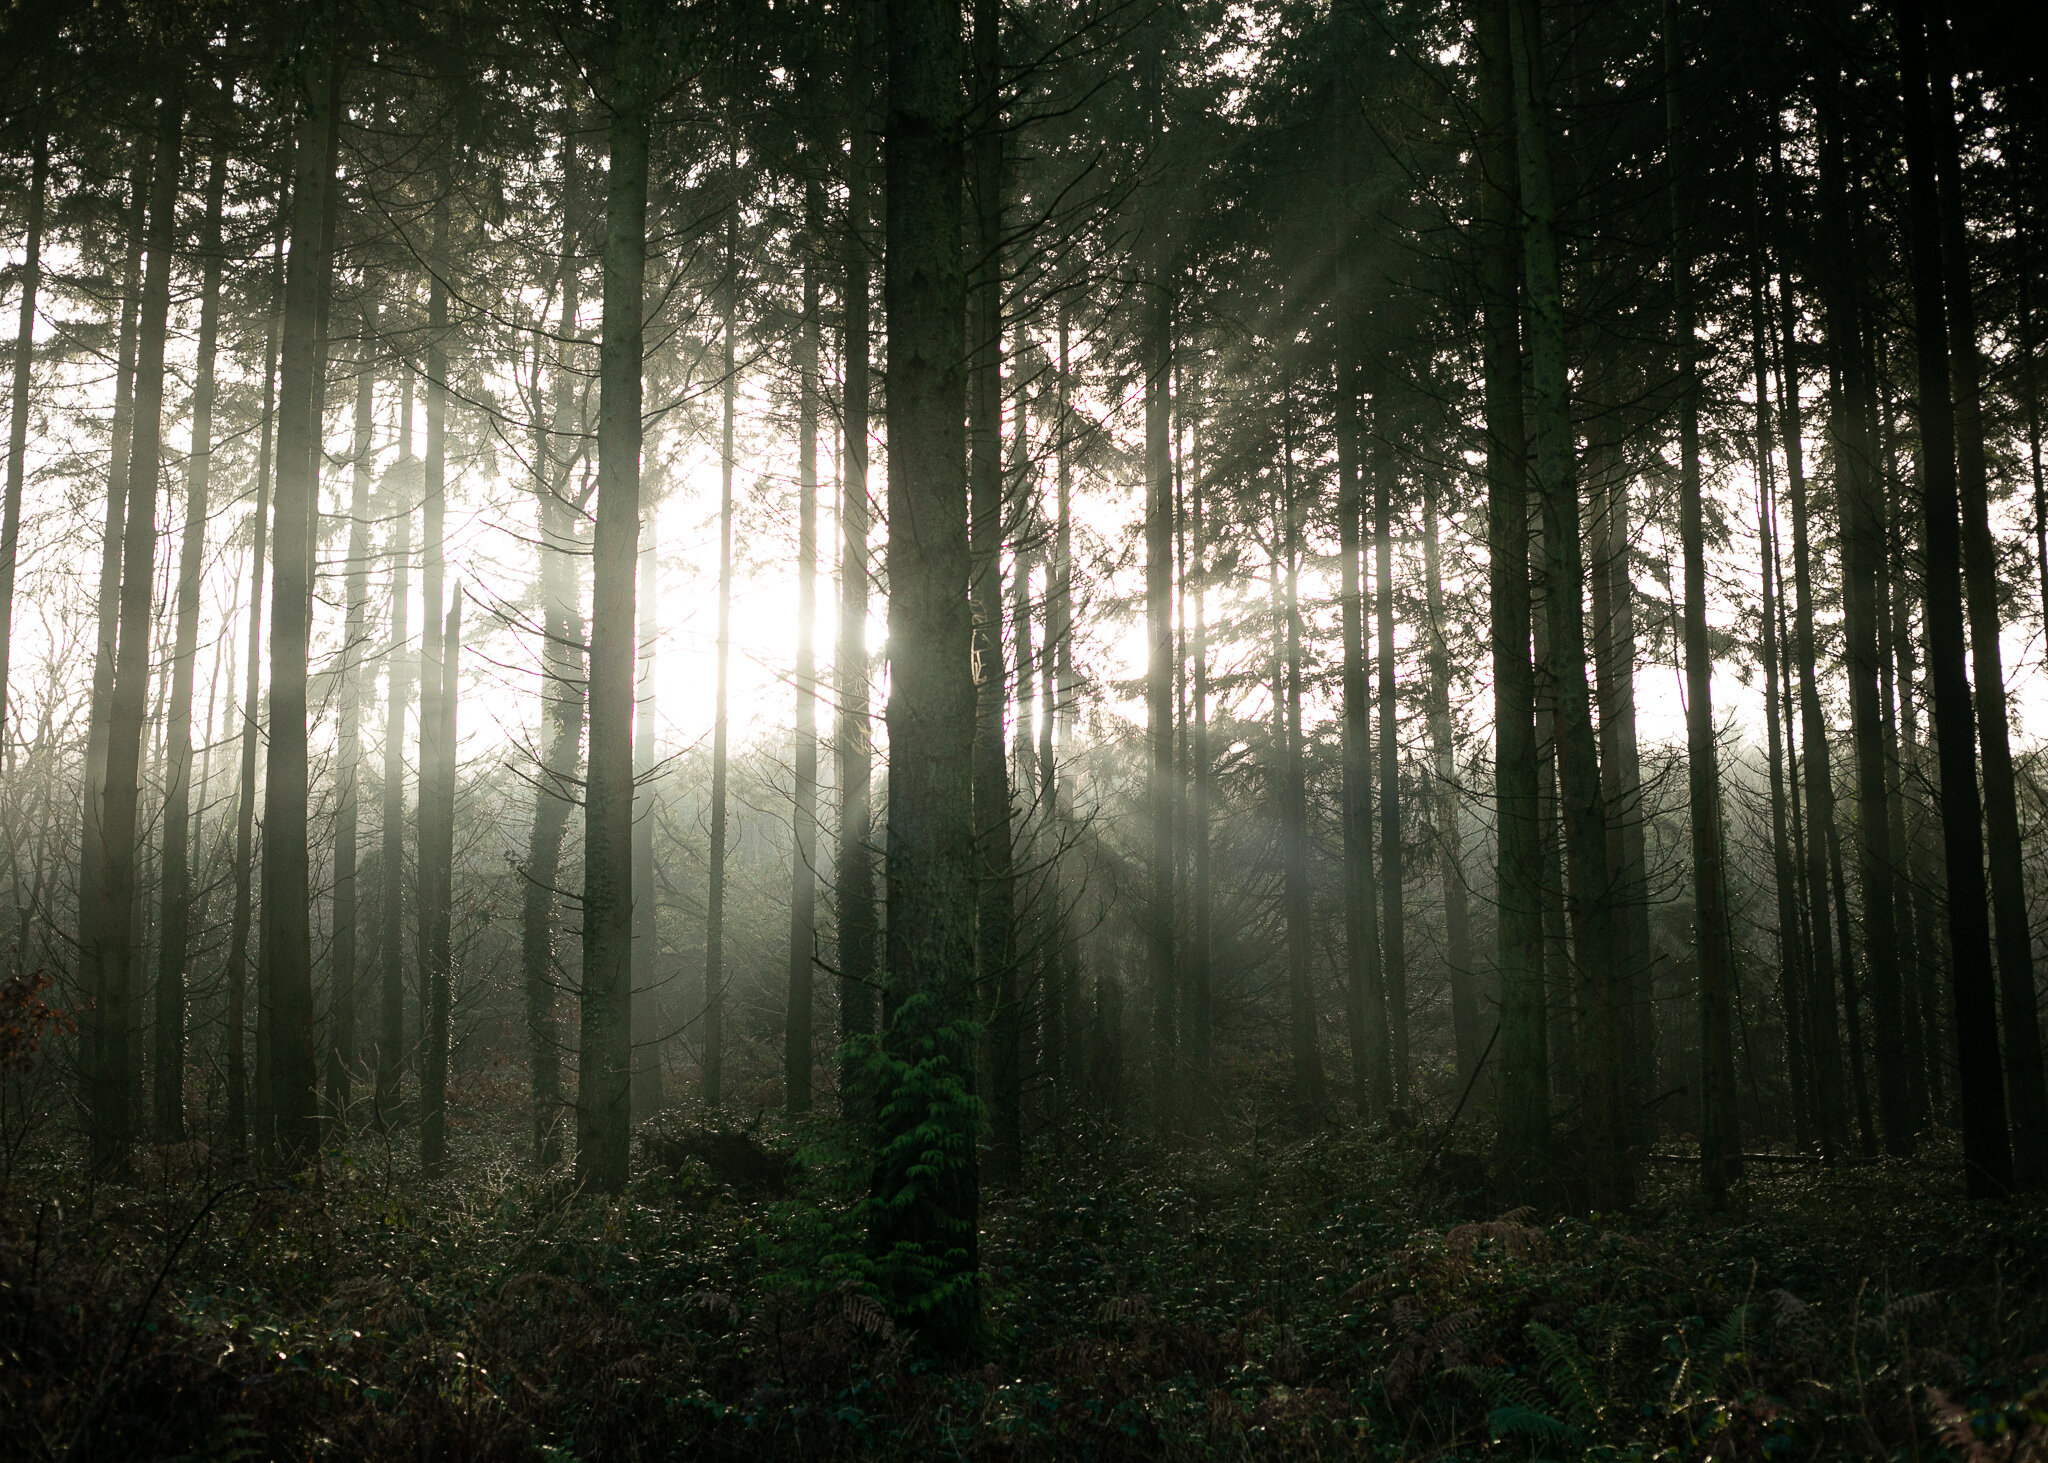 The light rays shimmer through the forest trees in the Forest of Dean.